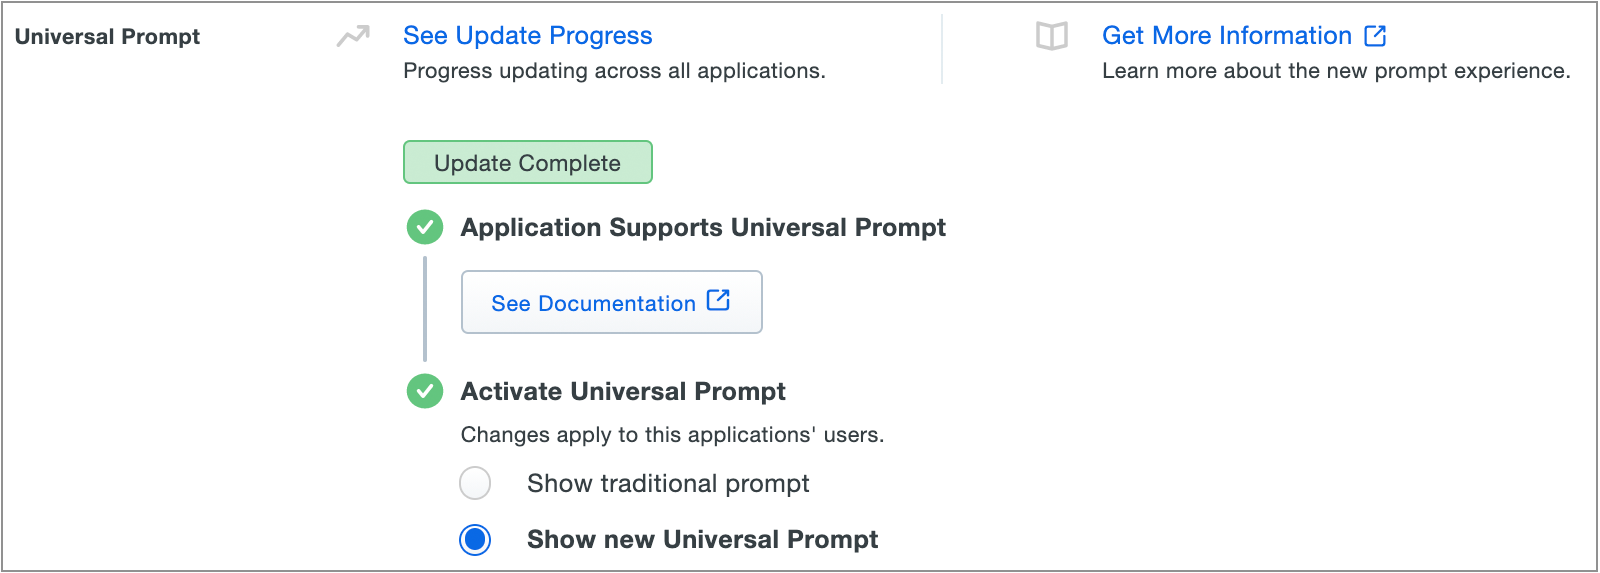 universal-app-complete_2x.png